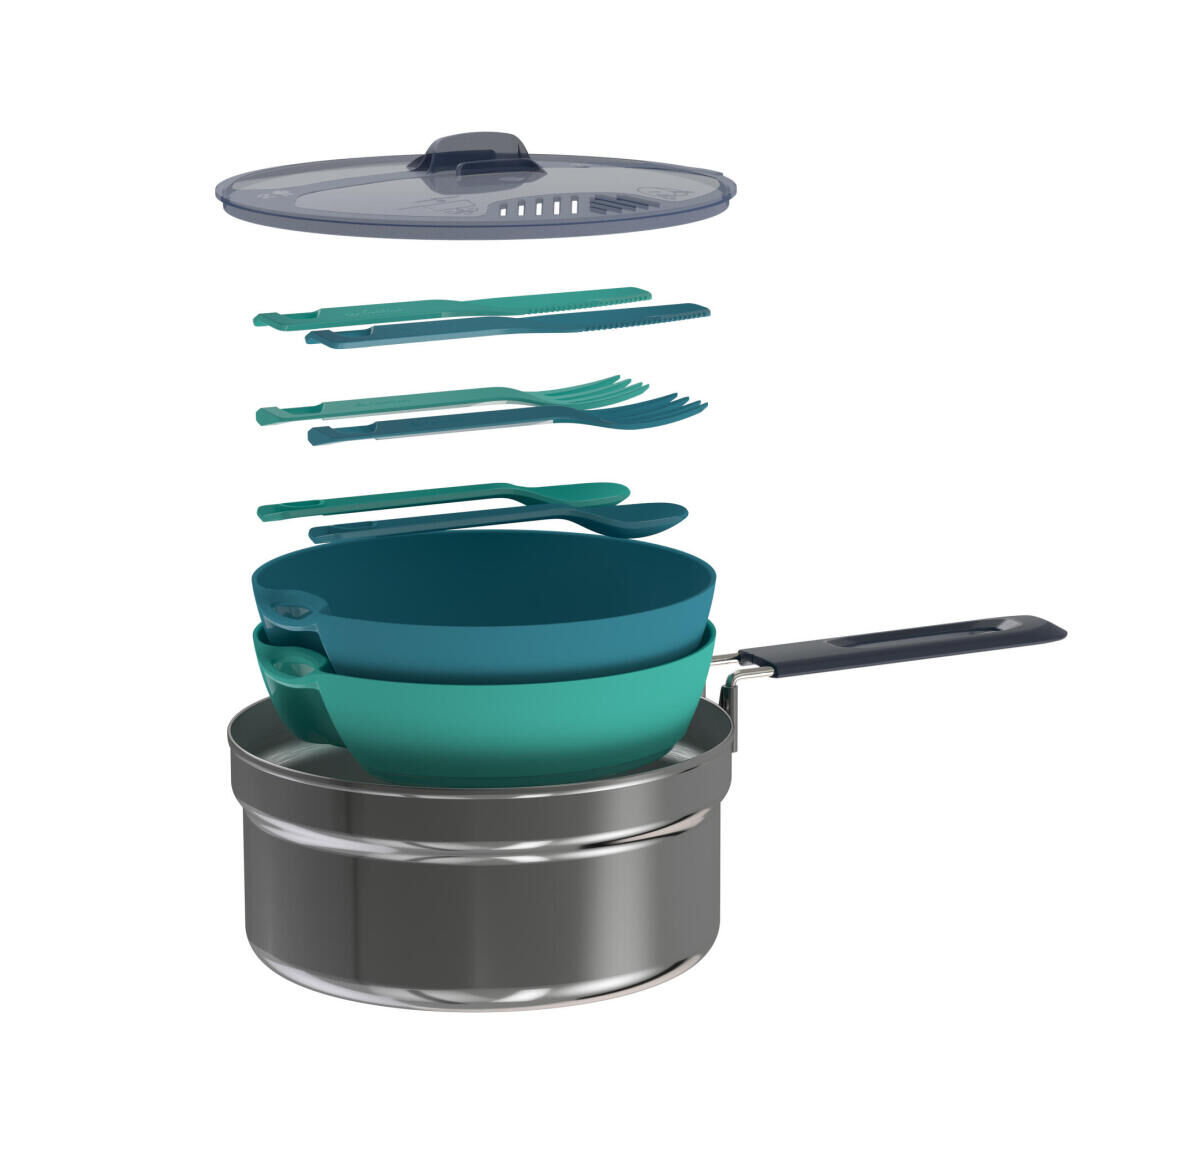 Cookset with cutlery